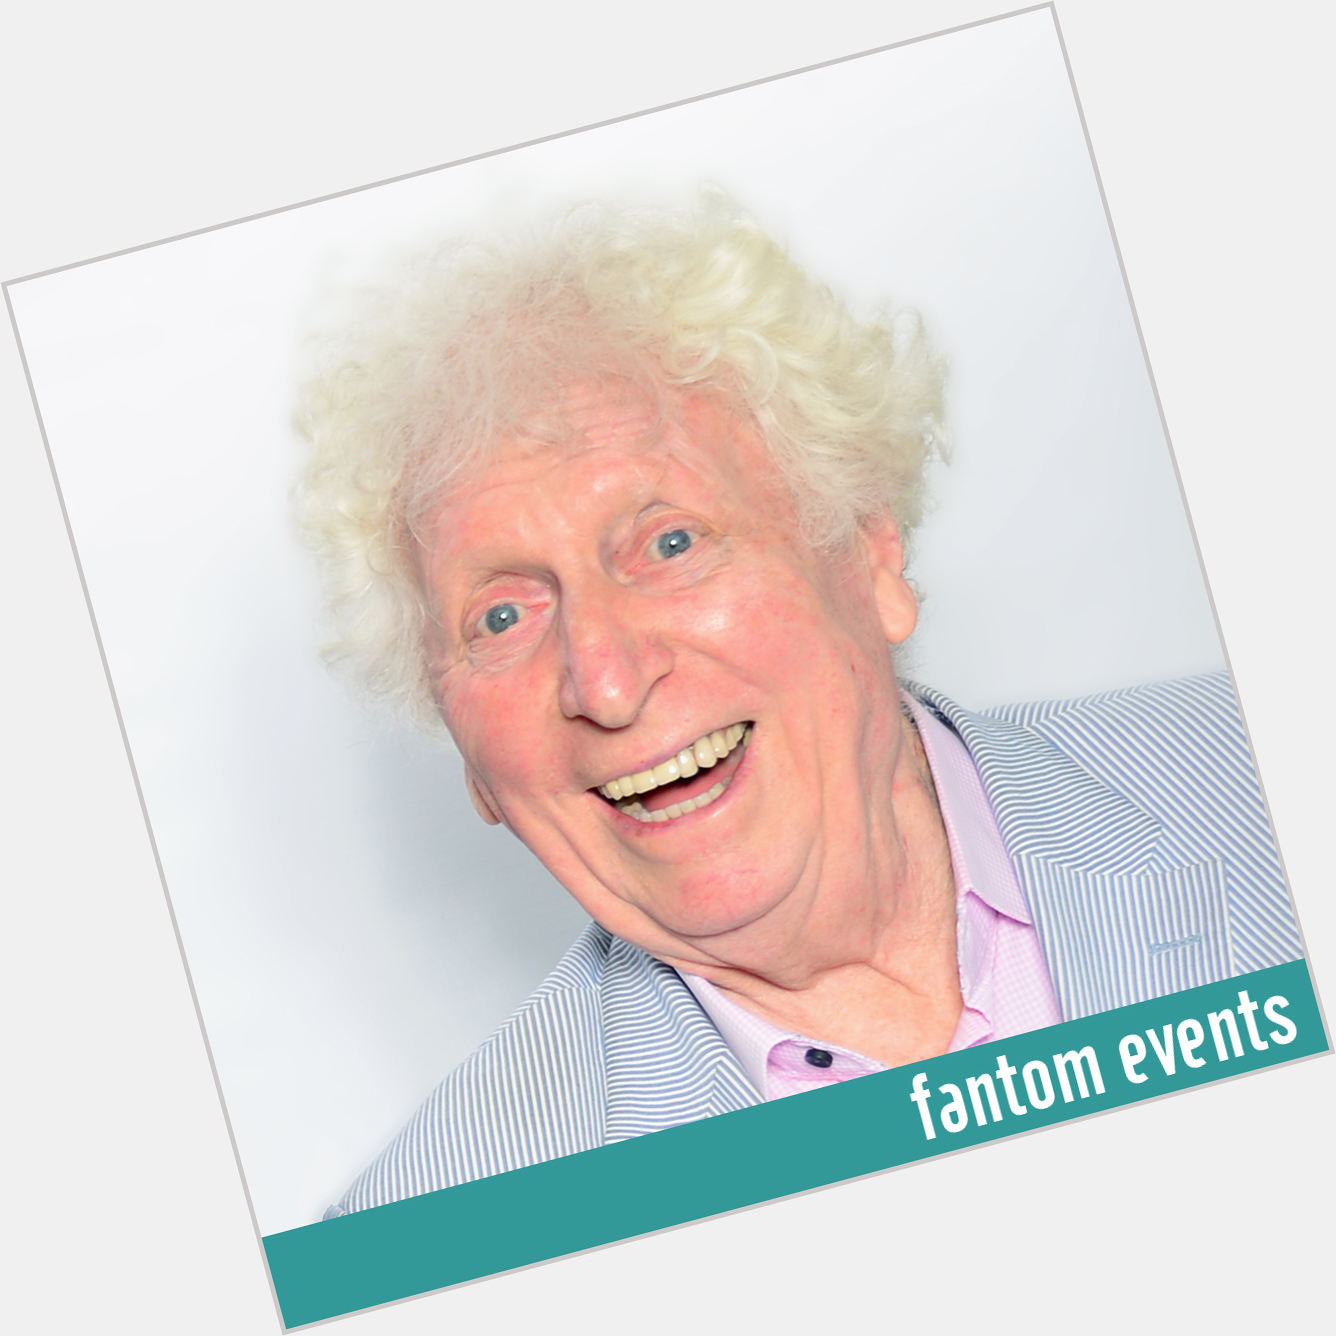 Wishing the legendary Tom Baker a happy 87th birthday filled with smiles and jelly babies!  